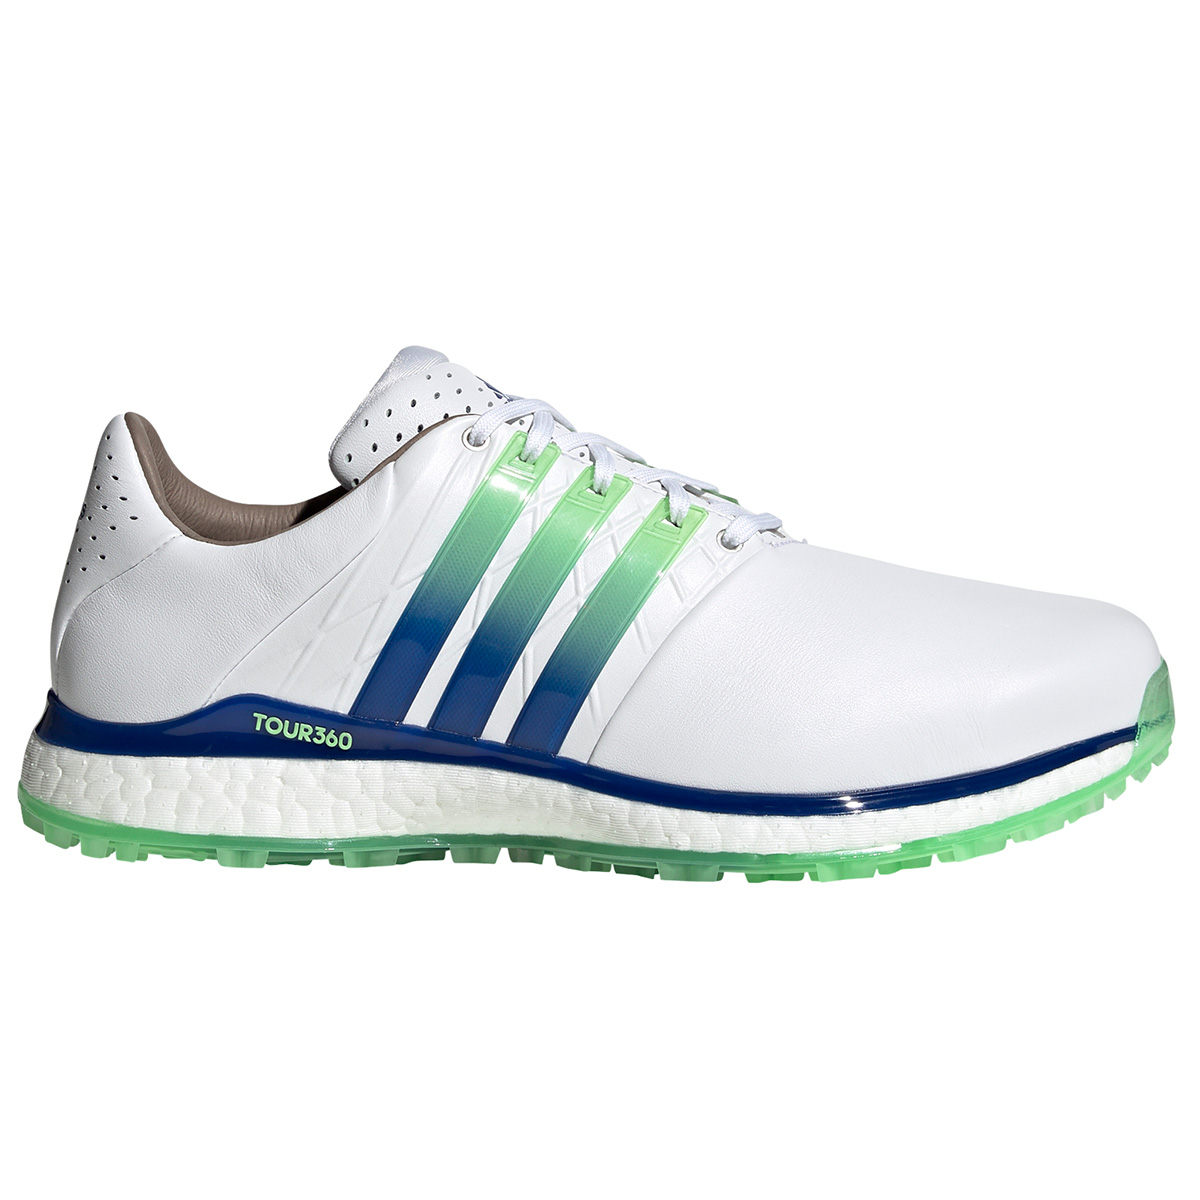 adidas spiked golf shoes